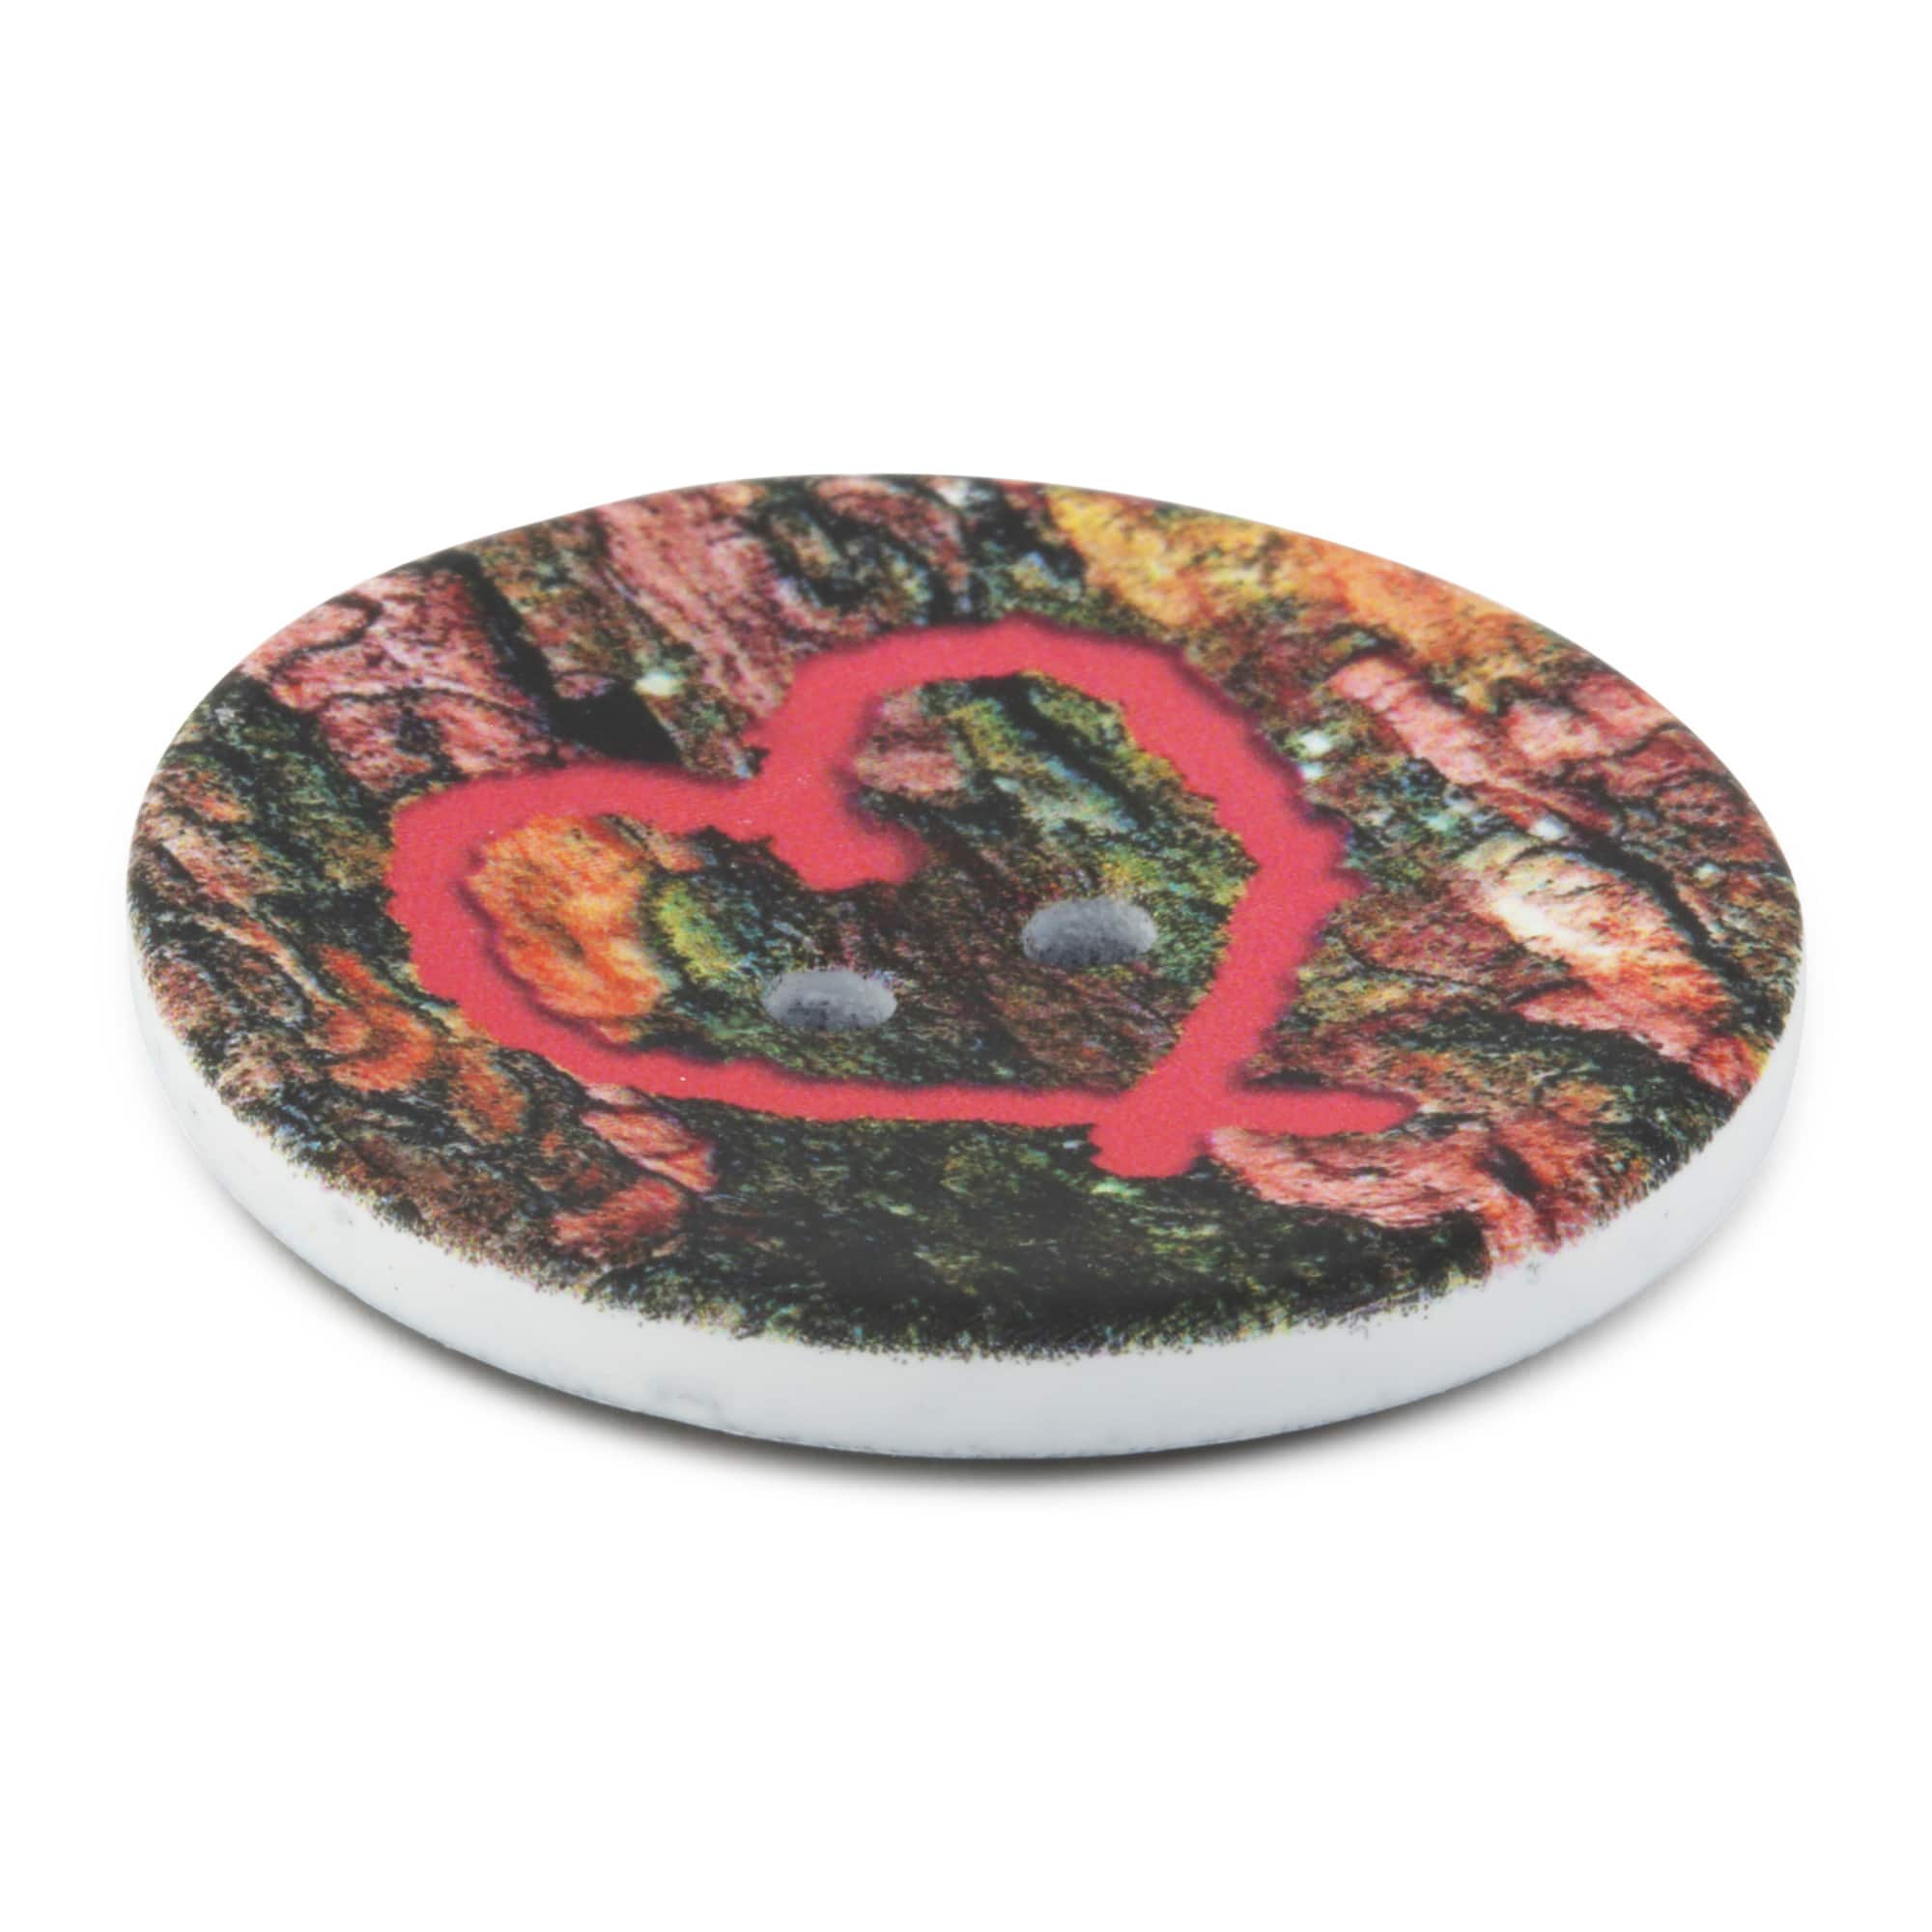 Dritz 30mm Sustainable Coconut Round Heart Buttons Red : Target